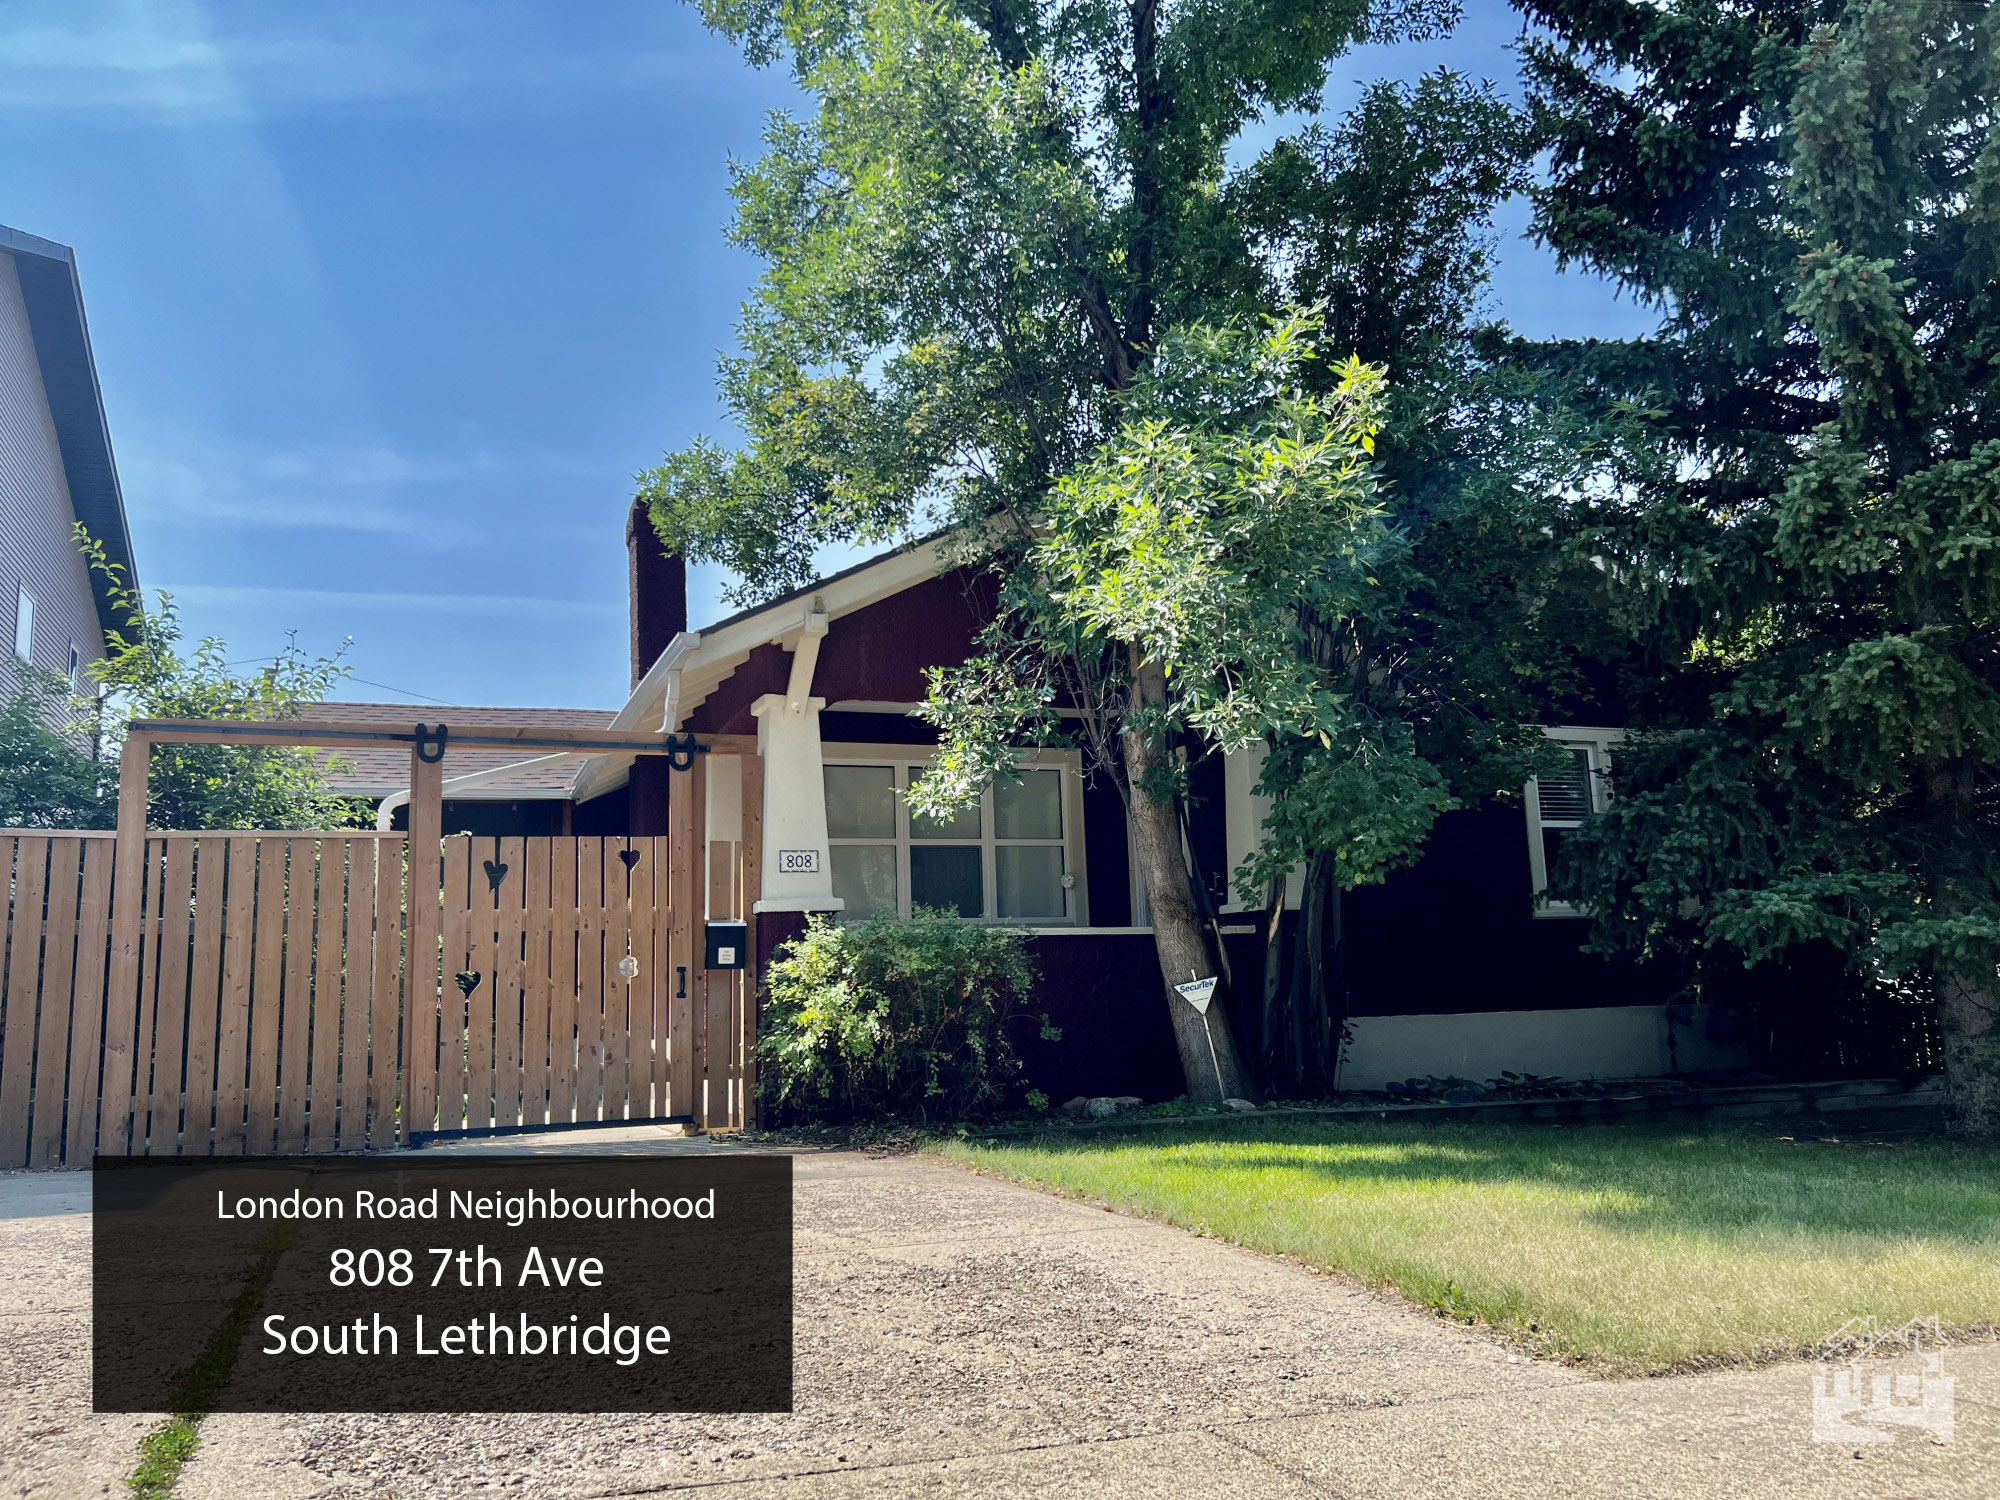 808 7th Ave South Lethbridge Cover image